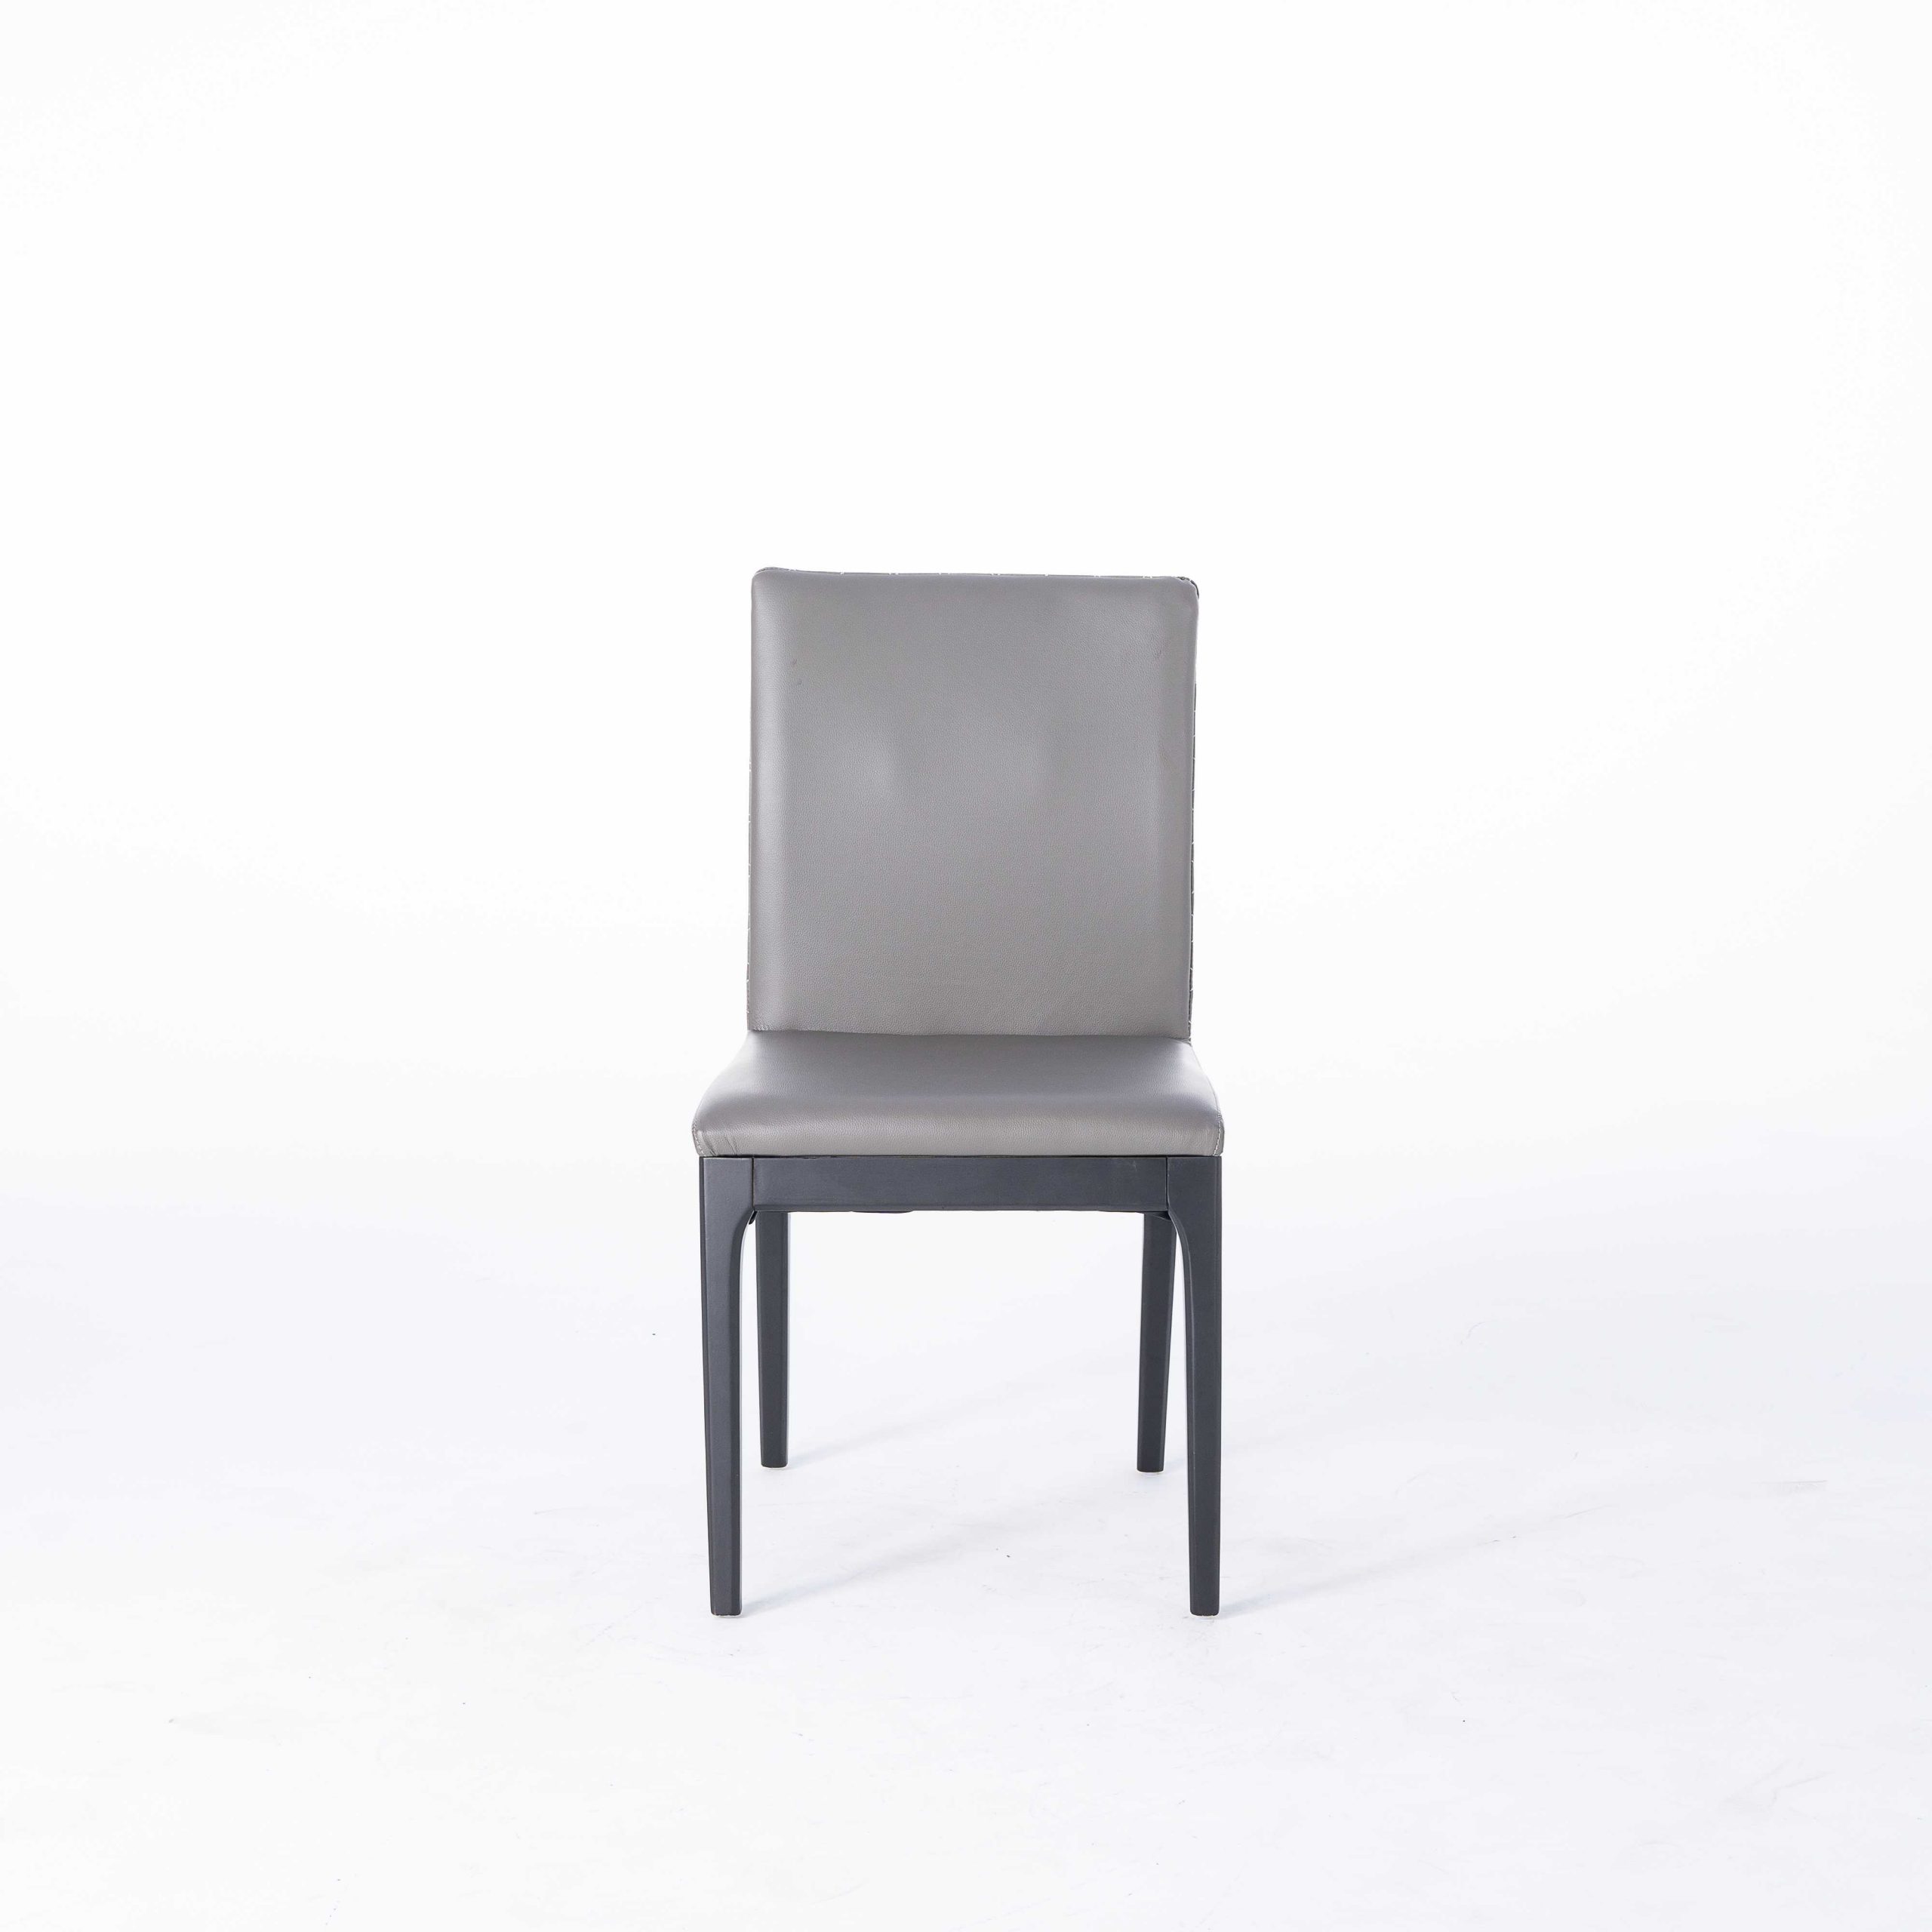 dkf14-china contemporary modern home furniture kitchen low back wood leather dining chair manufacturer 